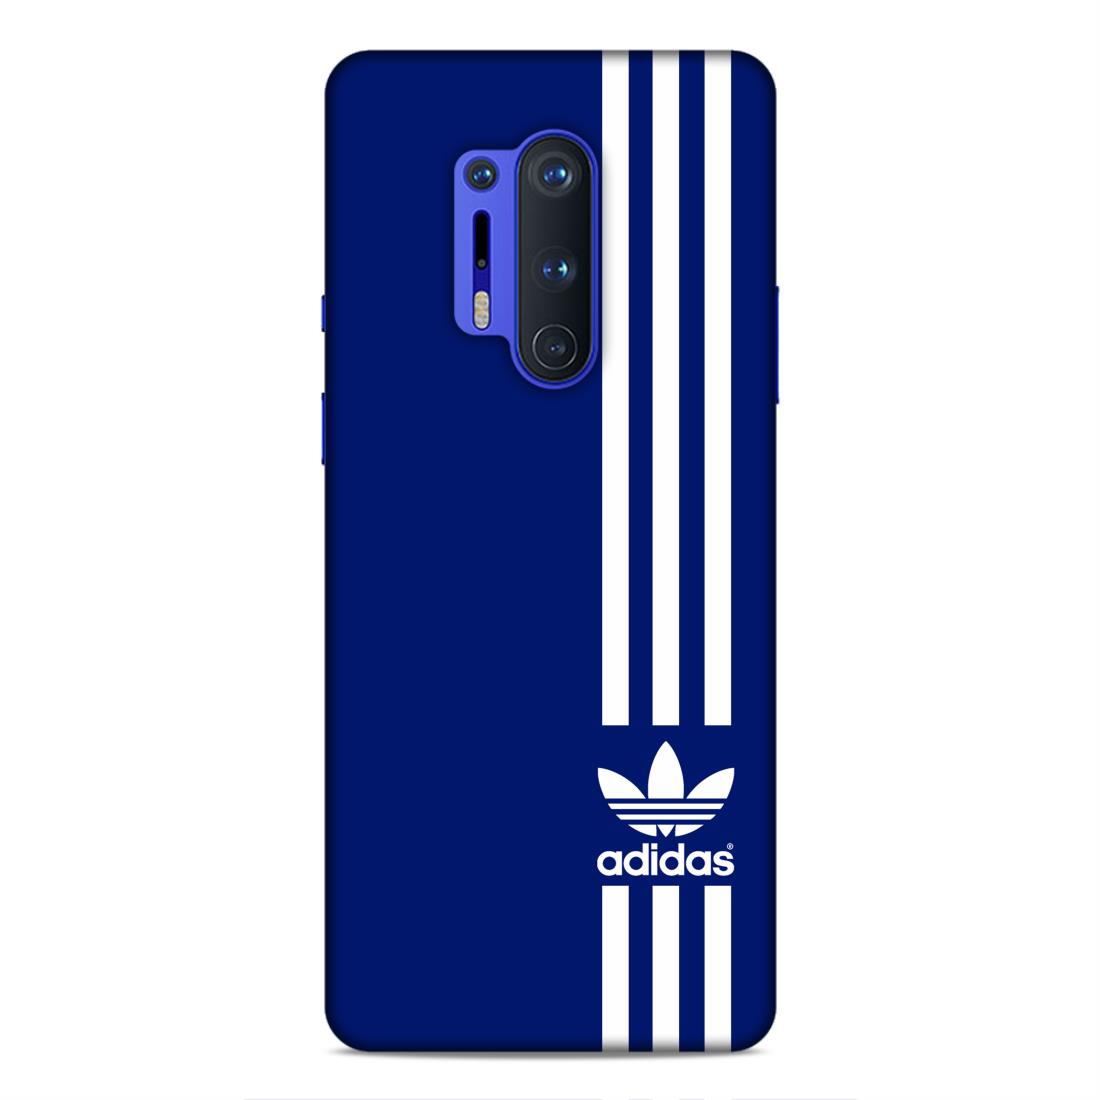 Adidas in Blue Hard Back Case For OnePlus 8 Pro